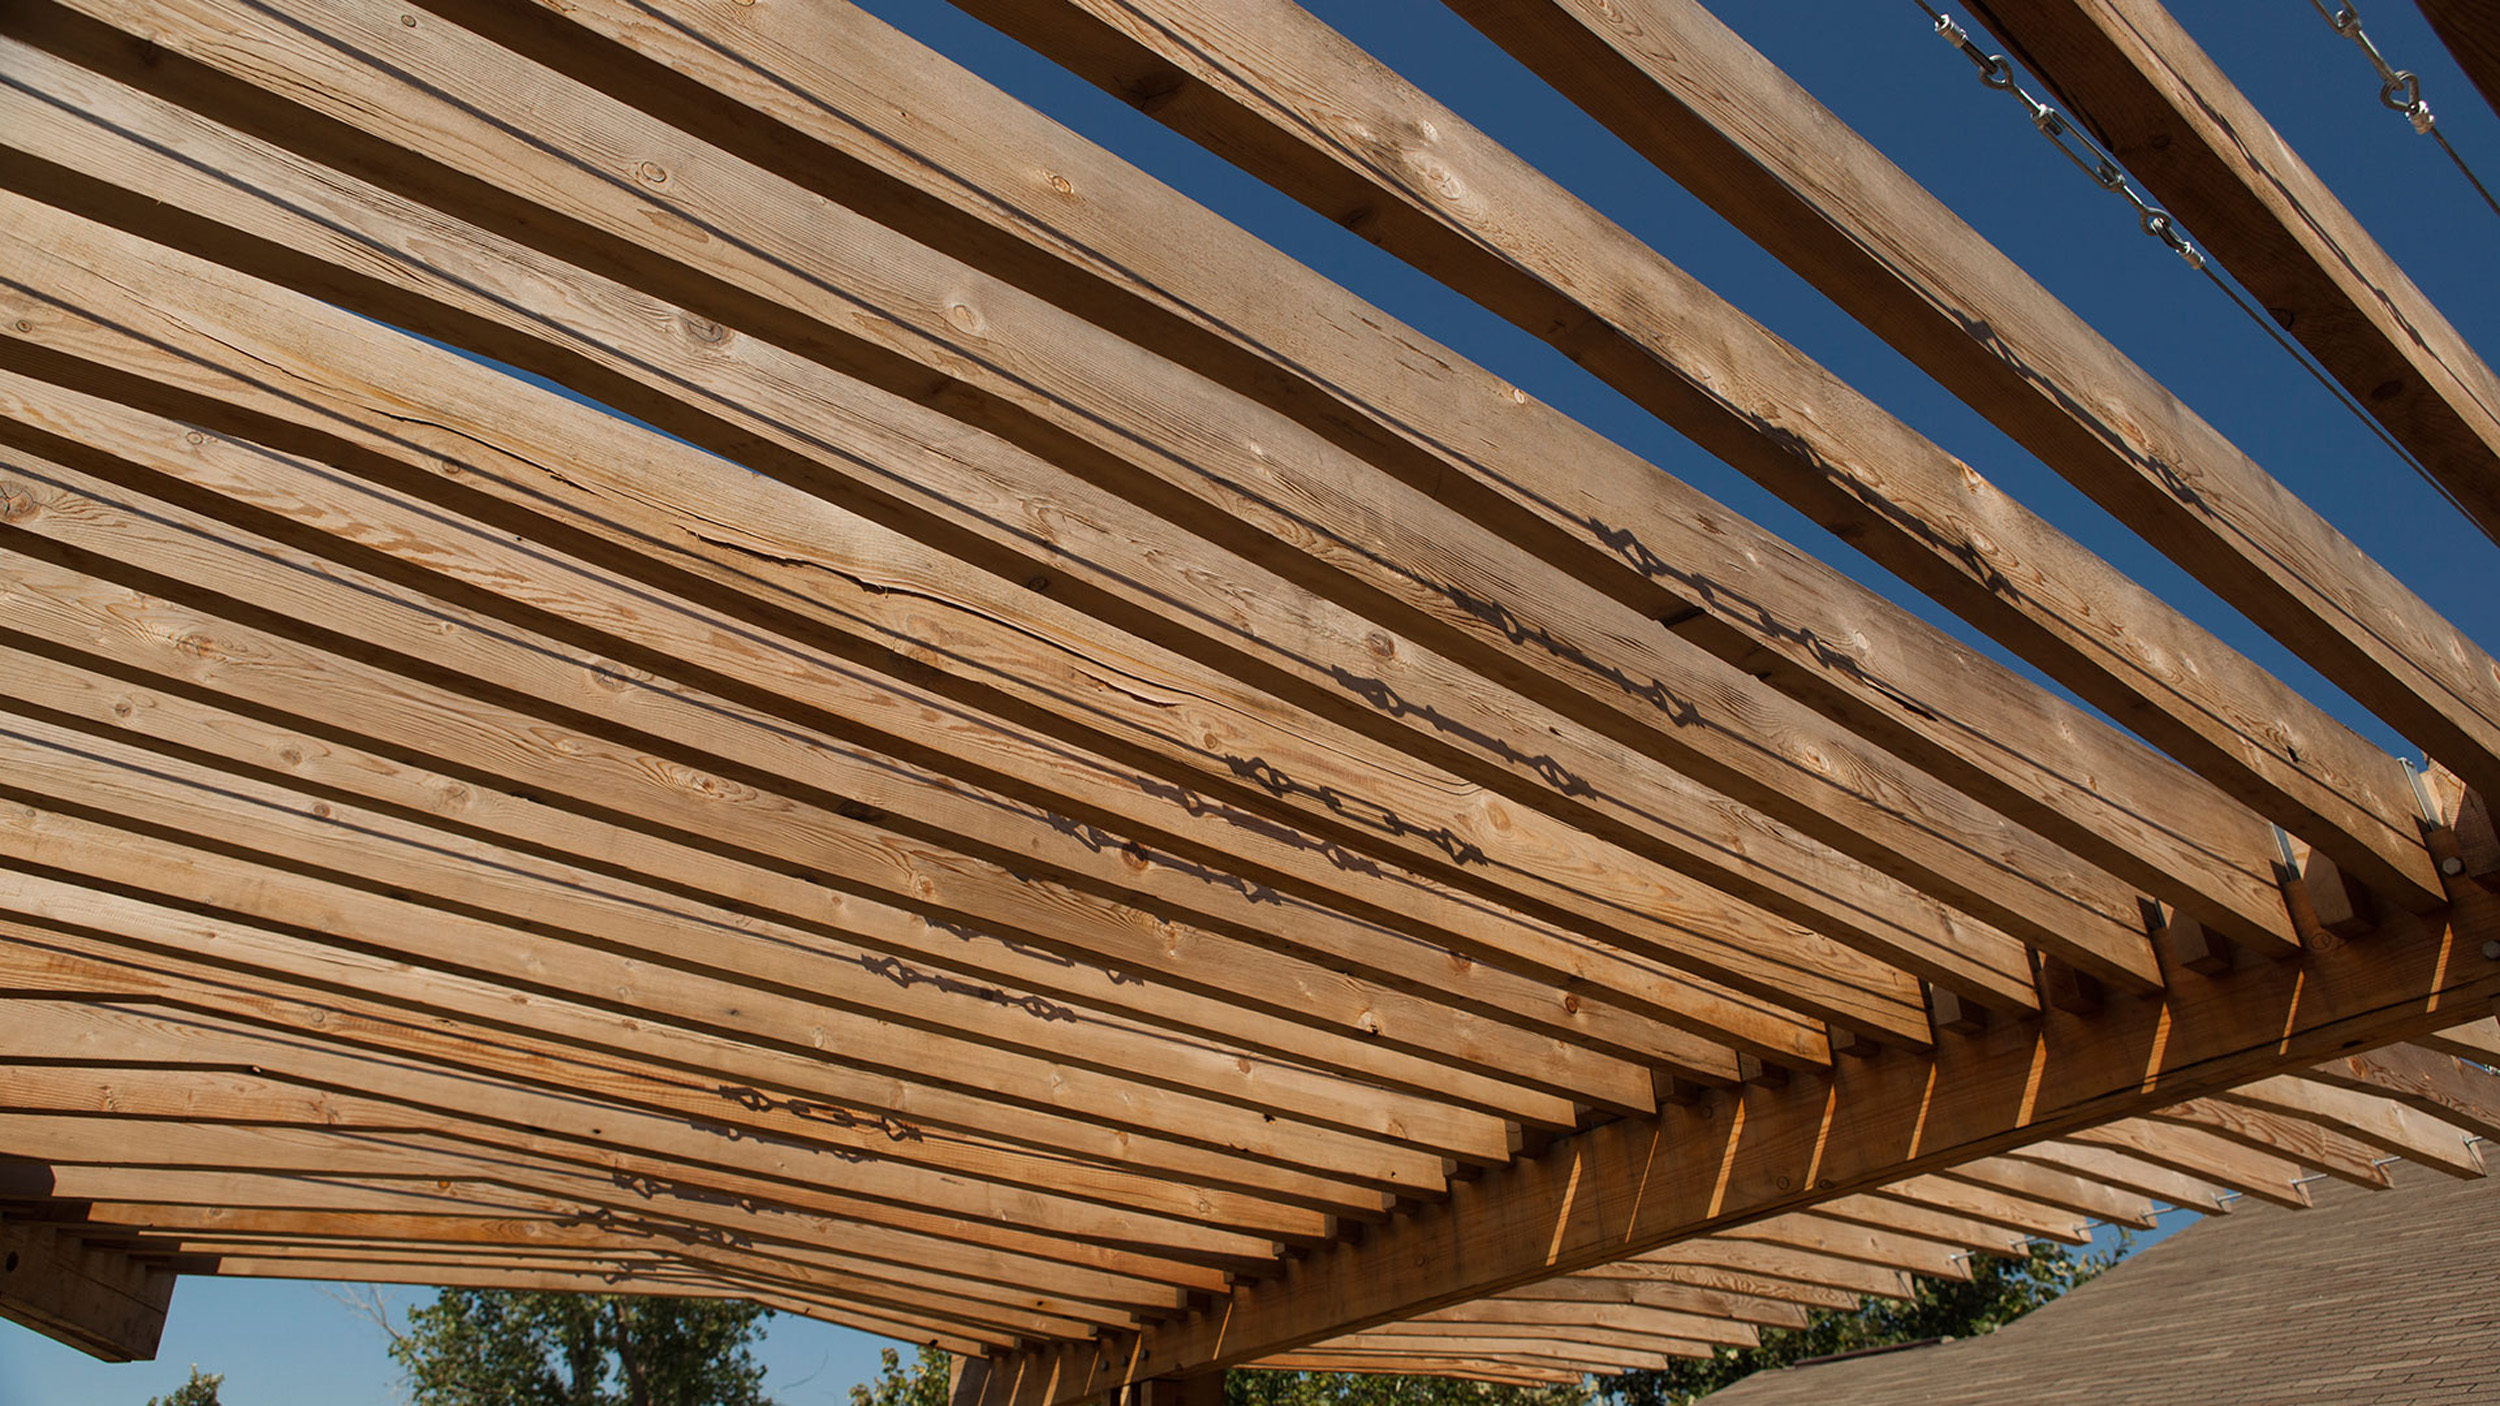 Armitage Pavilion, looking at the underside of the timber sunshade